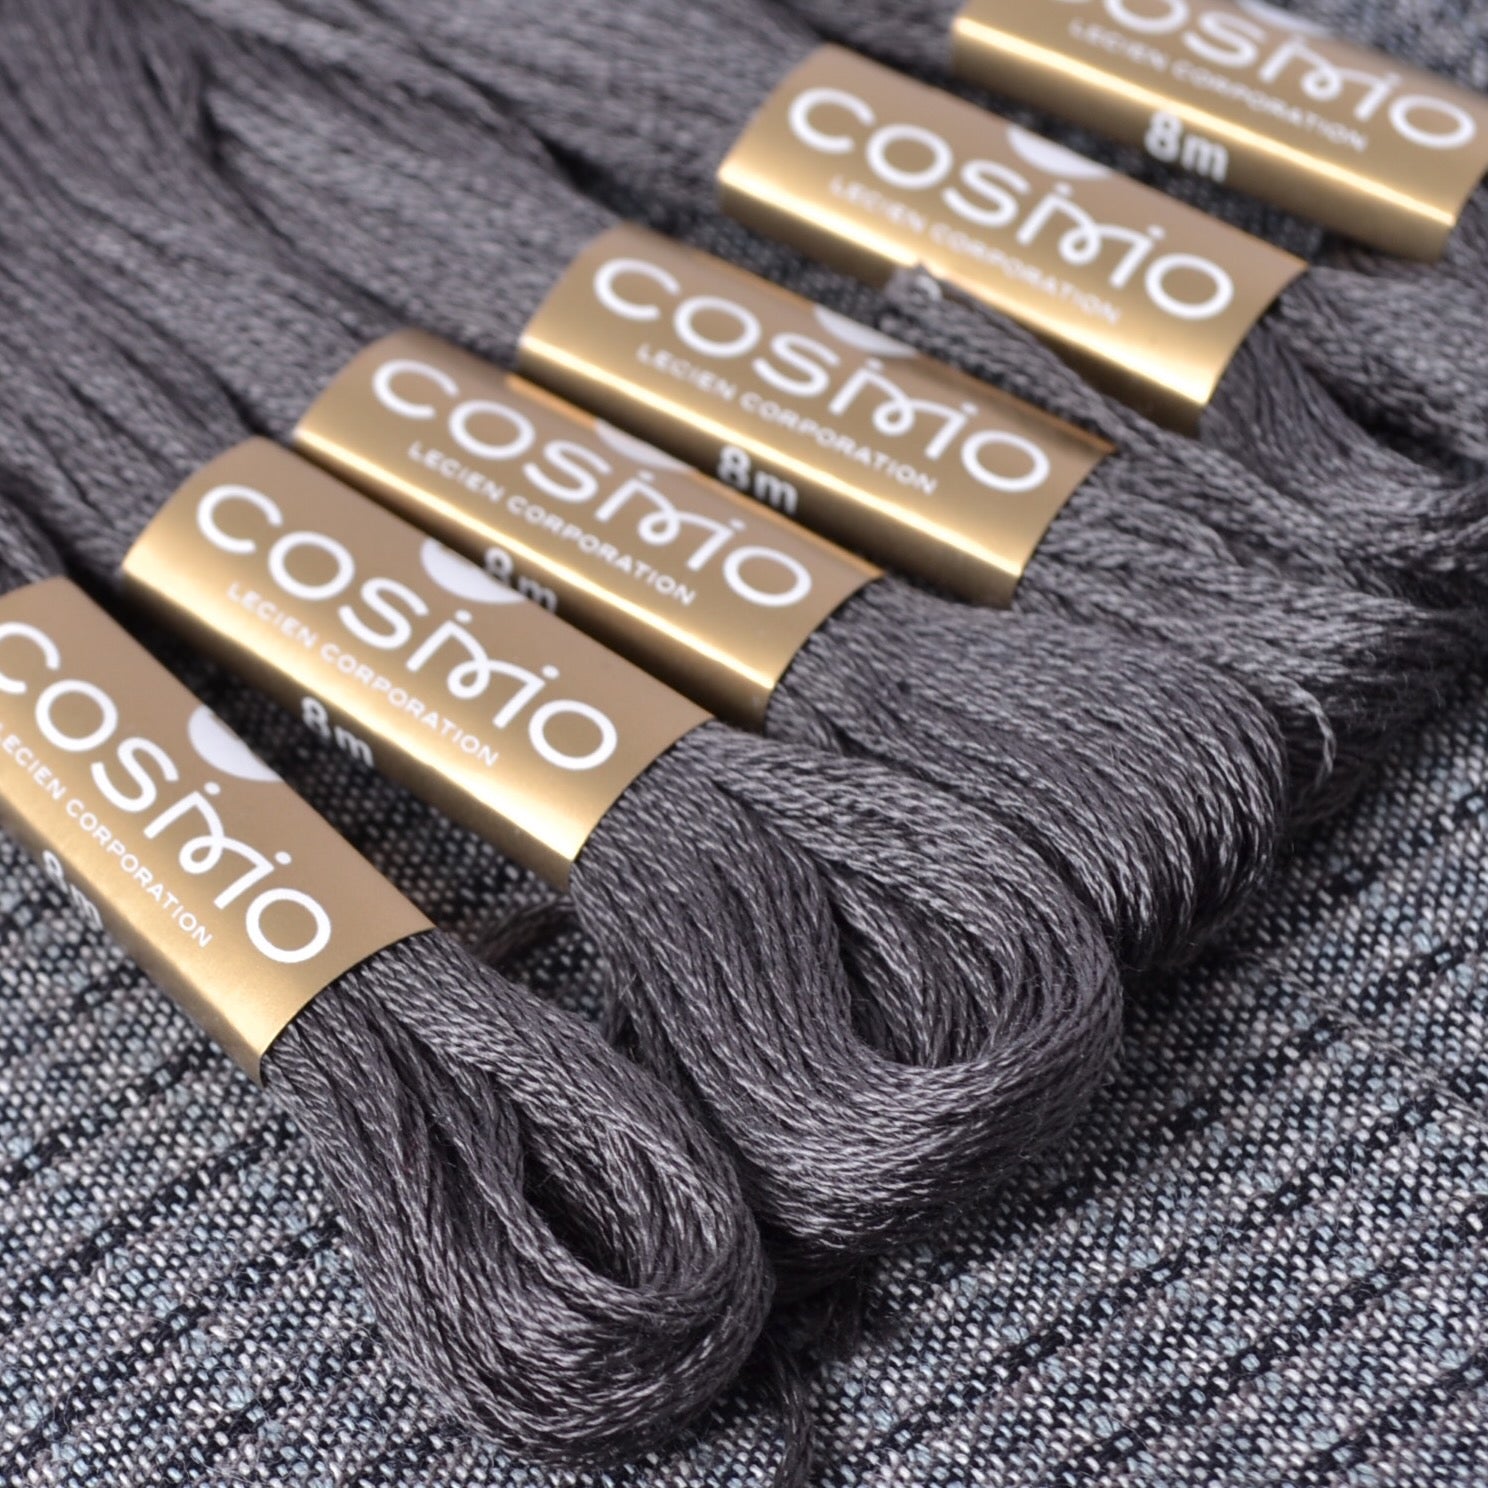 Cosmo shadow grey embroidery floss